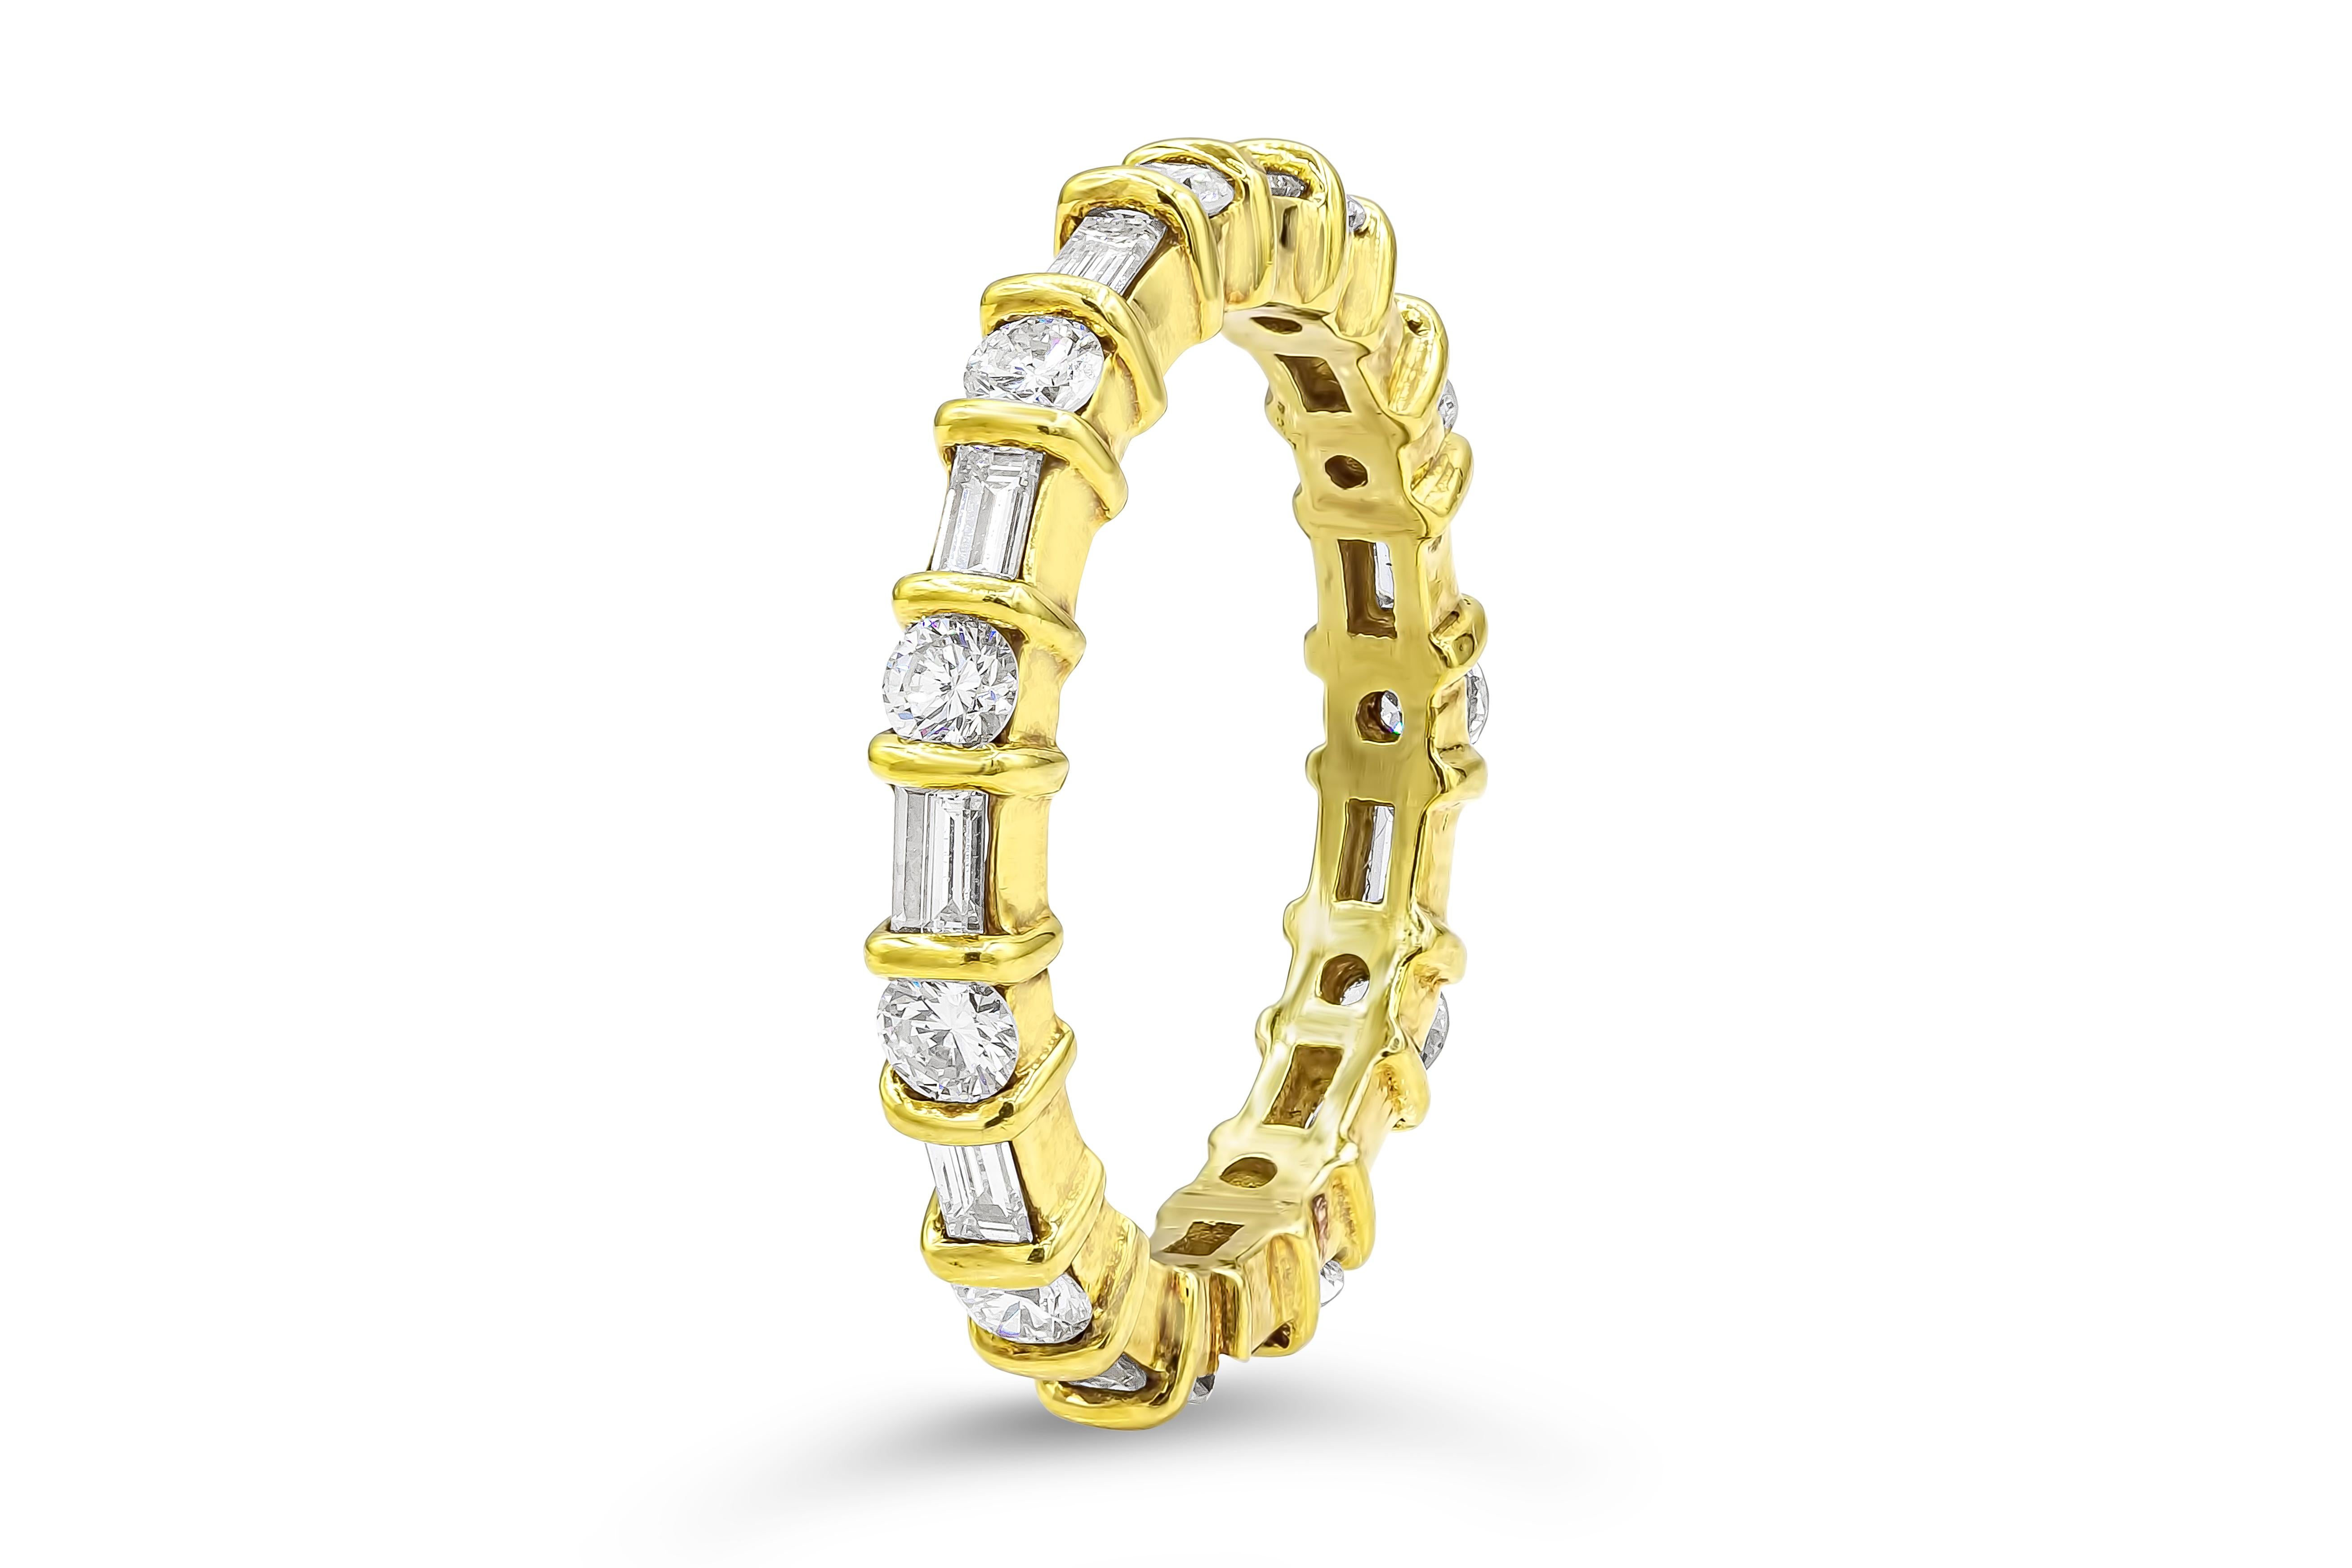 A unique wedding band, showcasing alternating round and baguette cut diamonds. The round diamonds weigh 0.78 carat total while the baguette diamonds weigh 0.72 carats total. Made with 14K yellow gold. Size 7.75 US. Perfect for your everyday